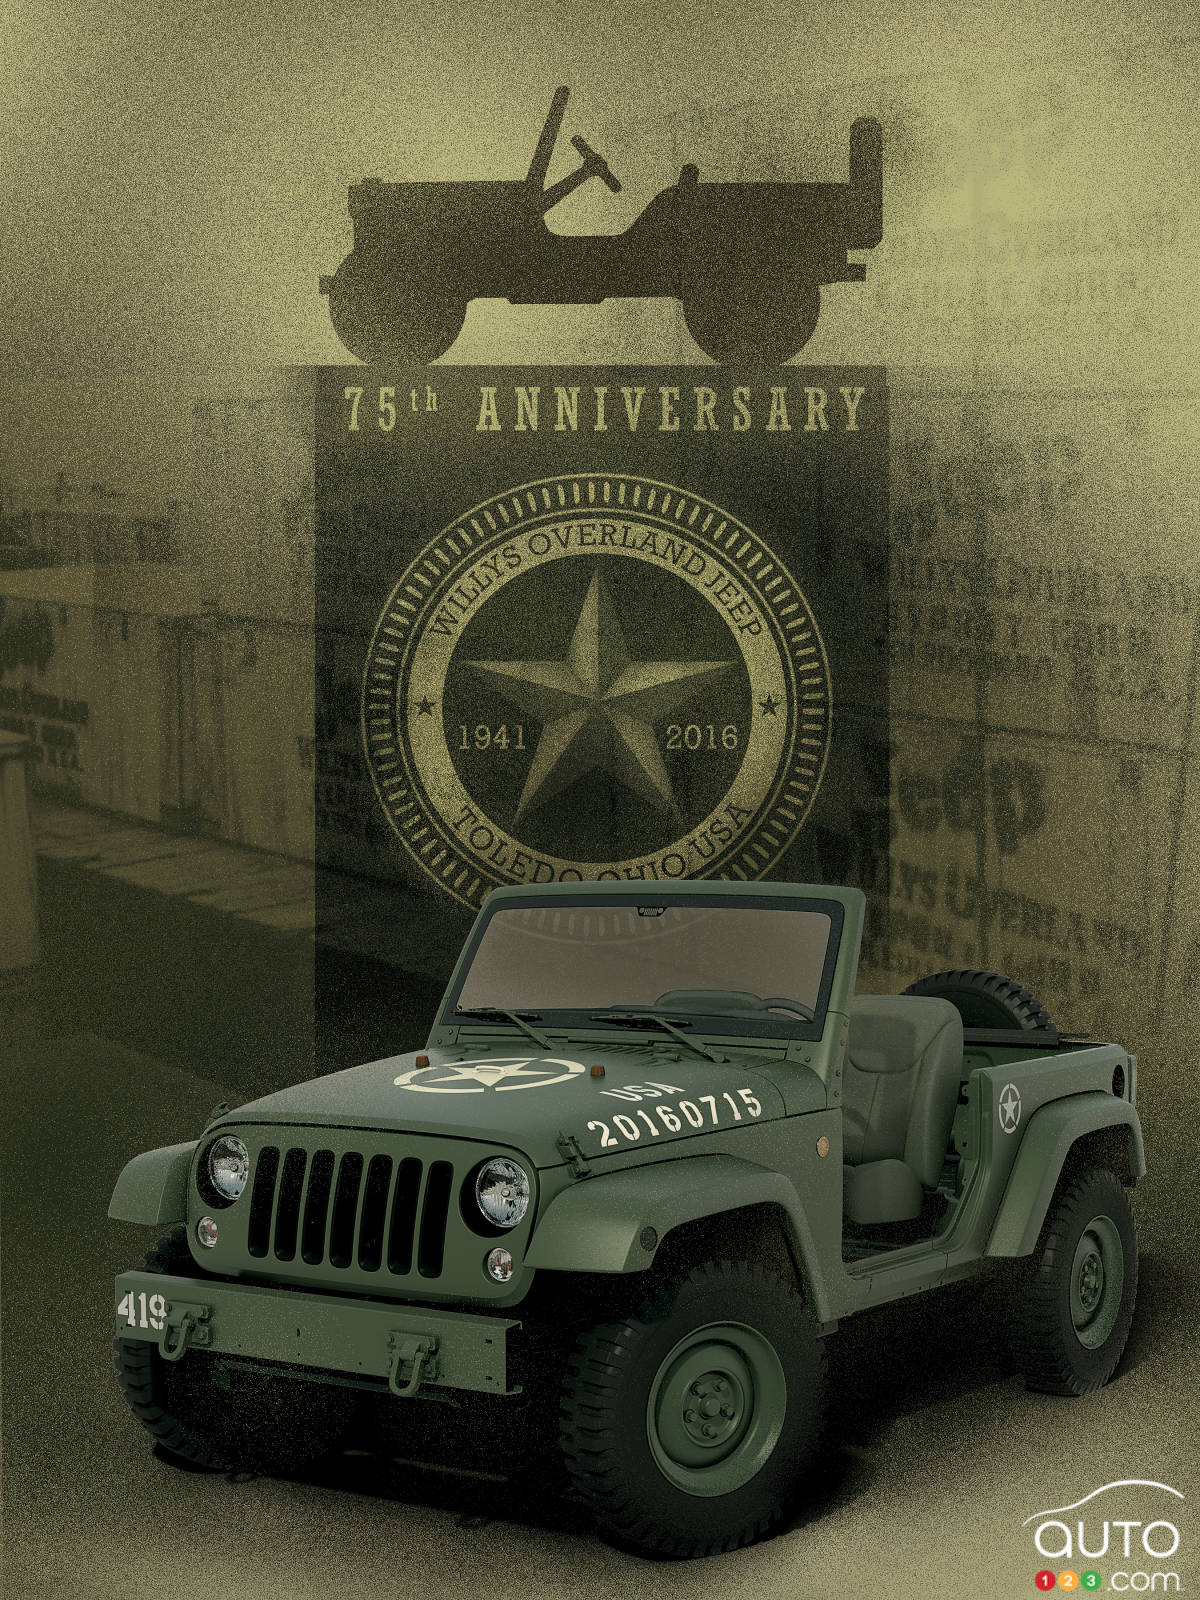 Jeep Wrangler 75th Salute concept full of Willys history